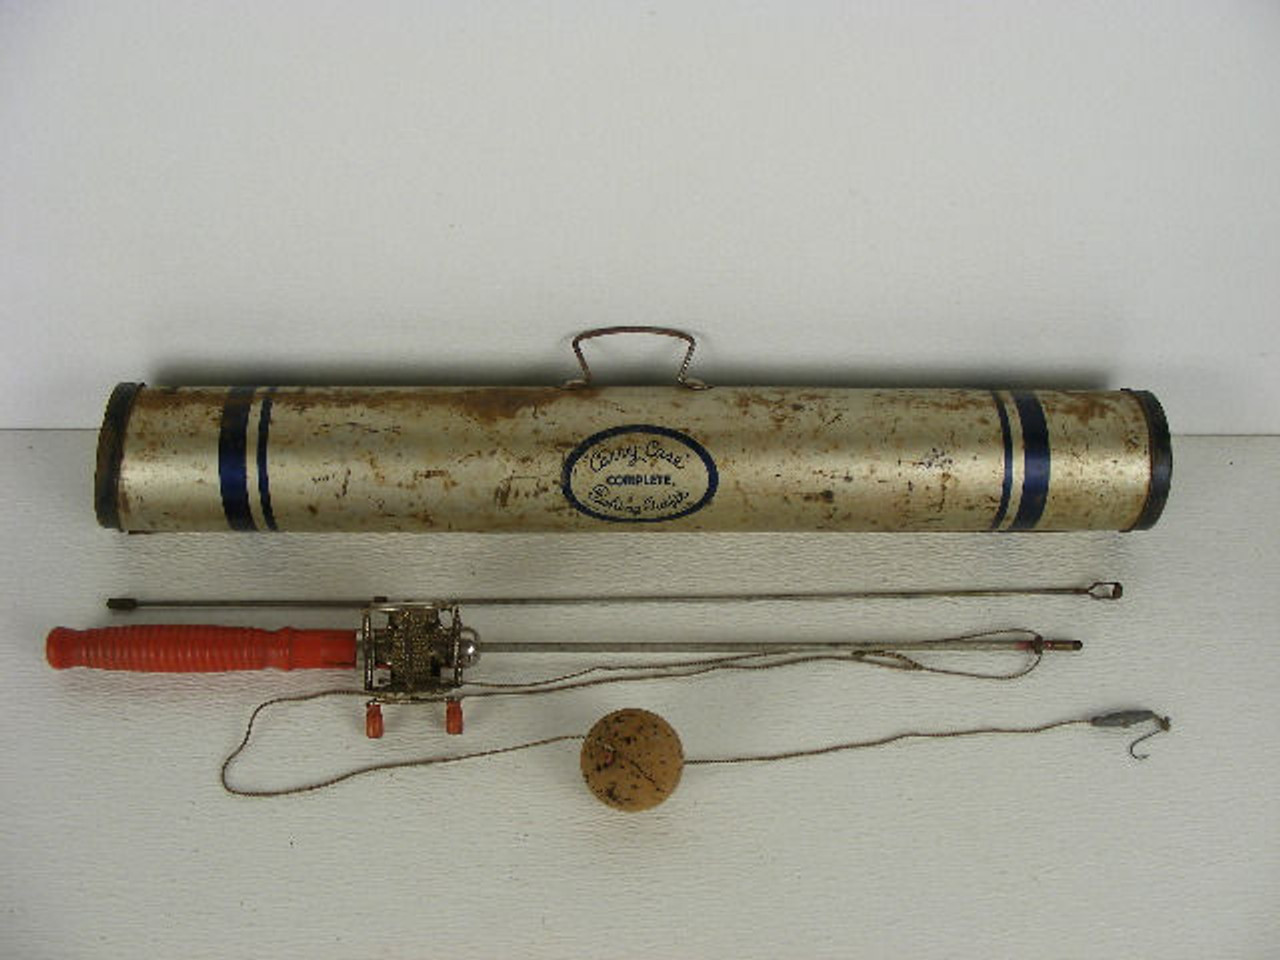 This is a rare old portable breakdown fishing pole that comes in its  original metal tube.The two piece pole has a red wooden handle and threads